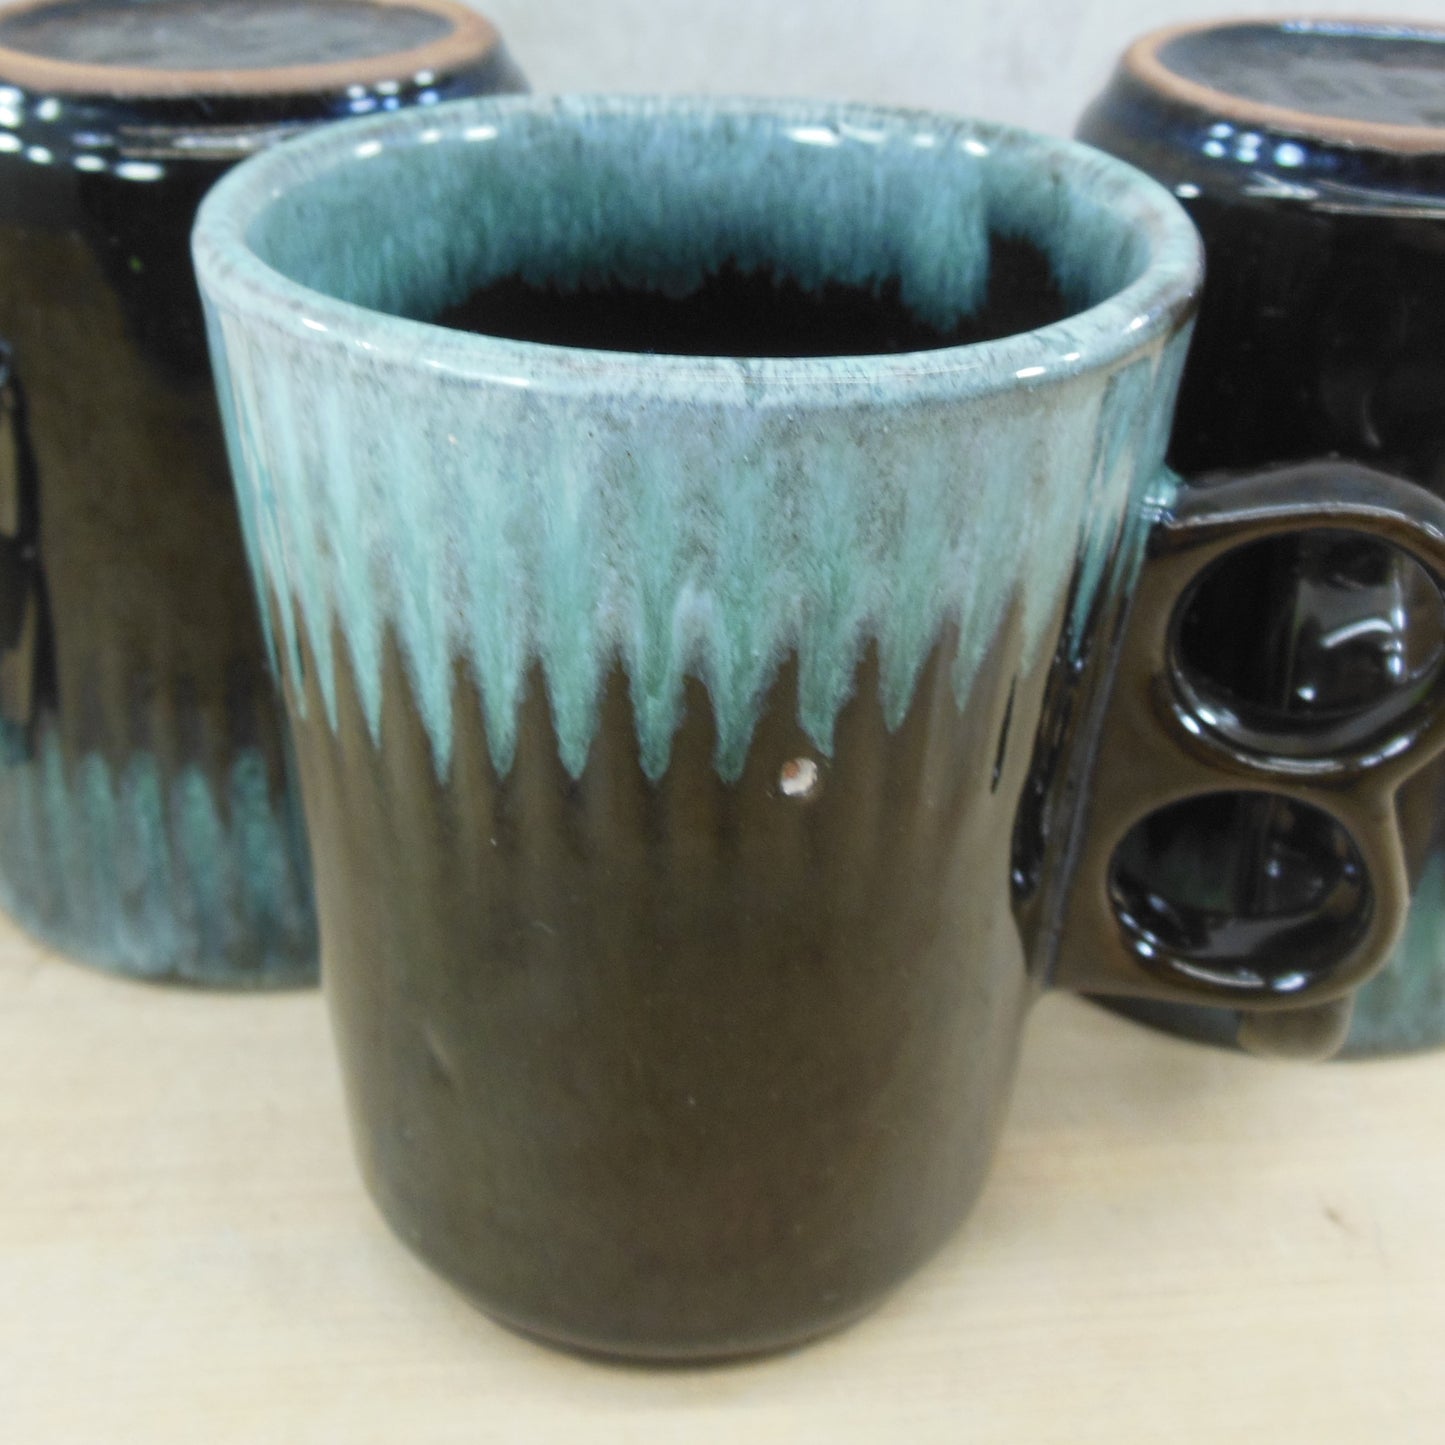 Canuck Evangeline Pottery Canada 1018 Mugs Teal Green - 3 Set used